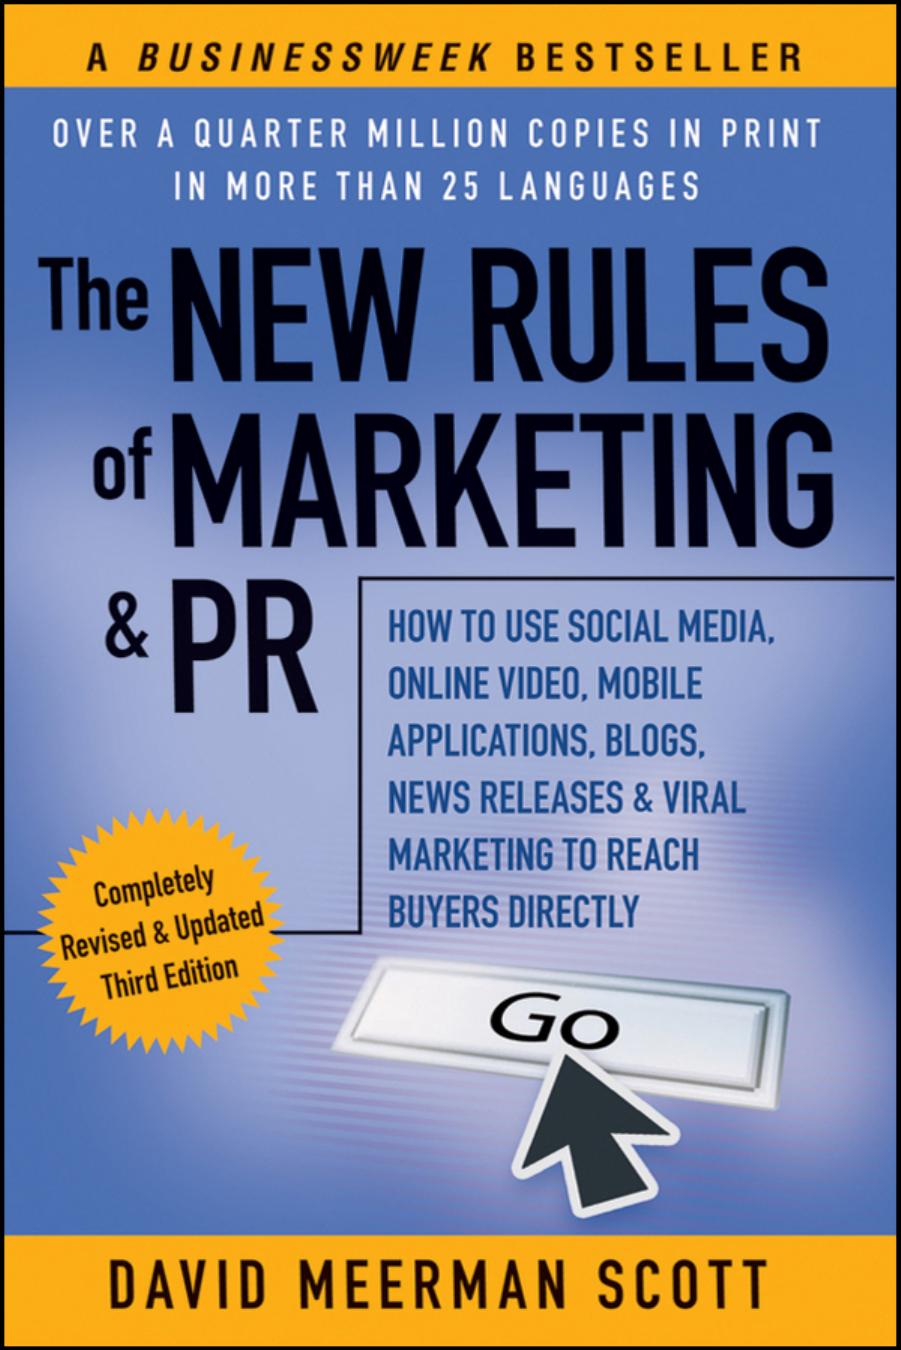 The NEW RULES of MARKETING & PR: HOW TO USE SOCIAL MEDIA, ONLINE VIDEO, MOBILE APPLICATIONS, BLOGS, NEWS RELEASES & VIRAL MARKETING TO REACH BUYERS DIRECTLY